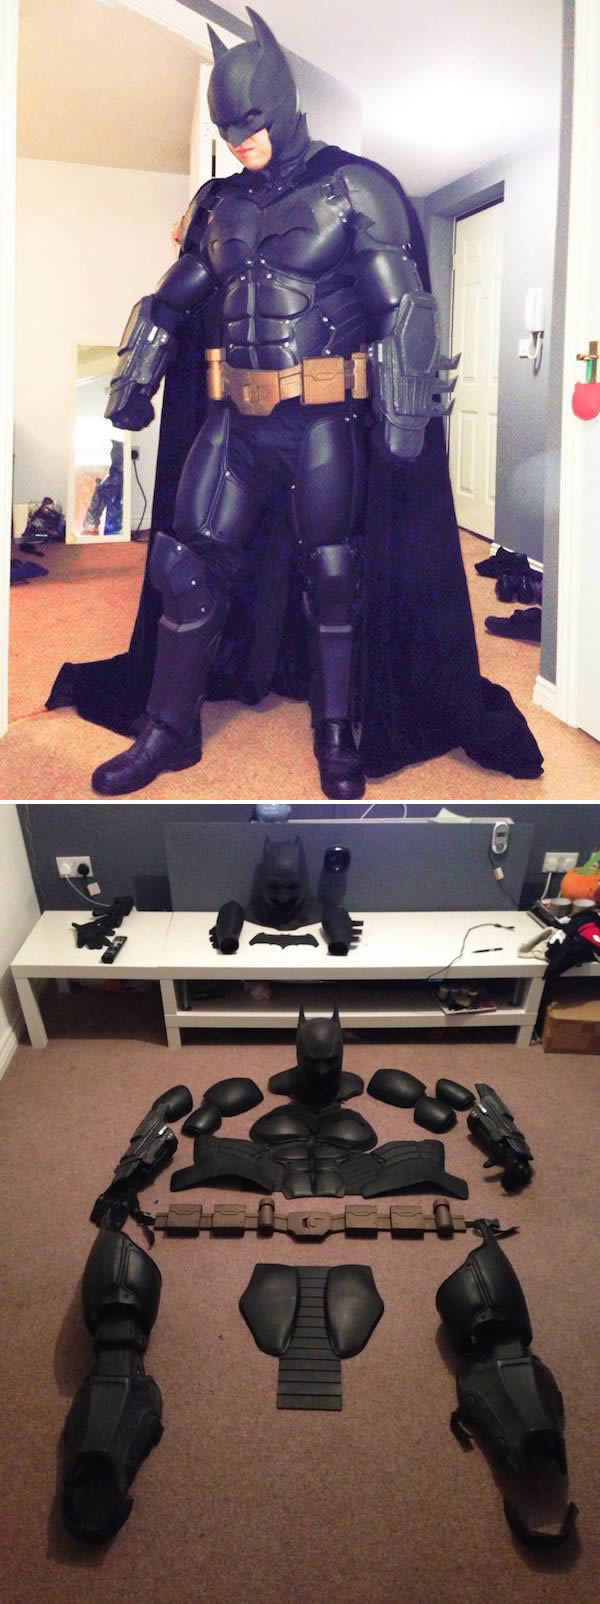 3D Printed Batman Suit-
Keith Harris was born with a deformed right hand caused by a rare condition called symbrachydactyly. Mother Kim Harris said her son has come out of his shell with the new hand.

Keith got his 3D hand through a group called the E-Nable Organization. A volunteer in North Carolina created the hand, which cost only $45. A new prosthetic would have been too expensive, about $40,000, and would have lasted only as long as Keith didn't grow